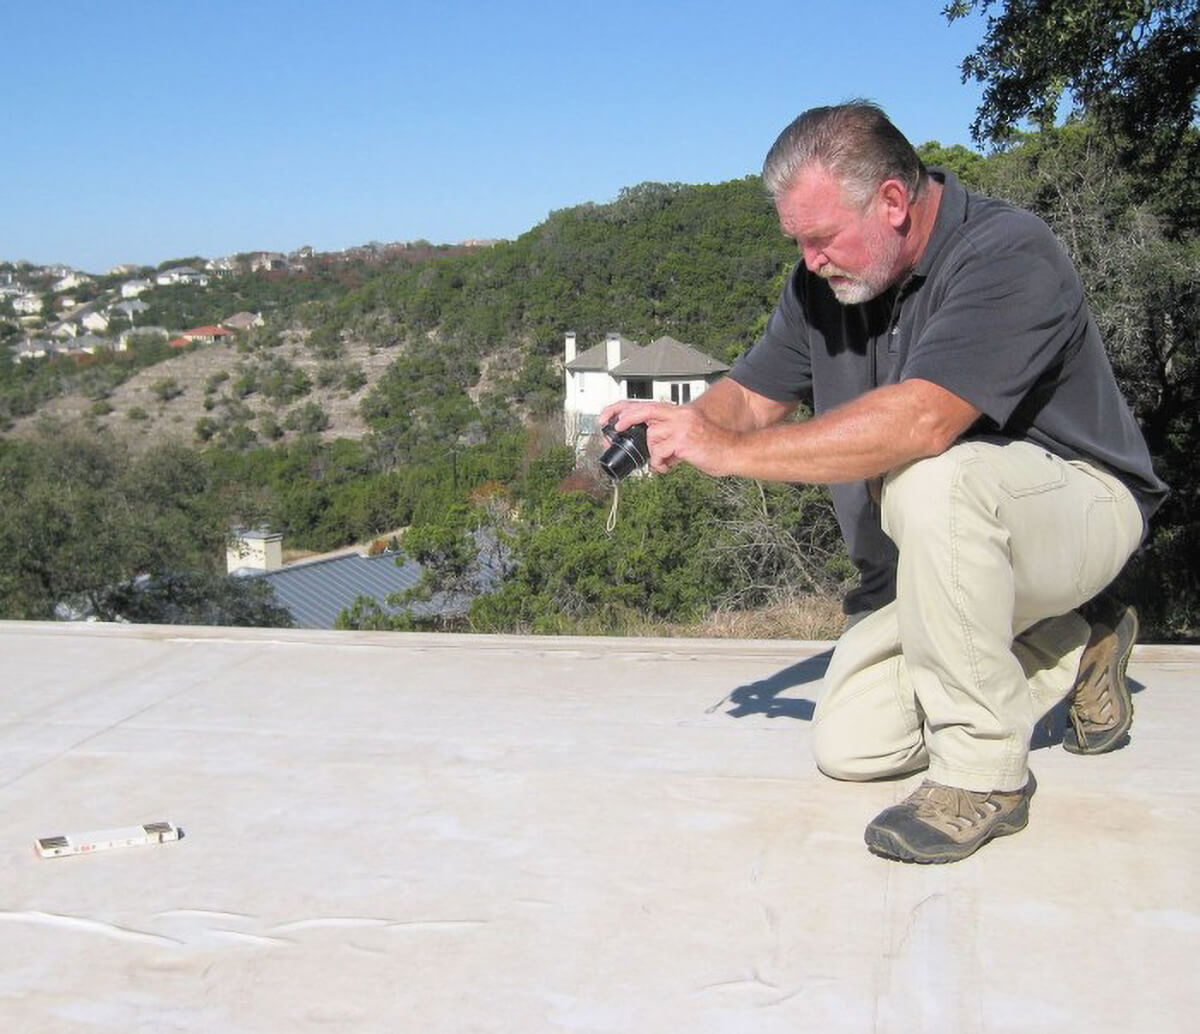 Don Putnam roof consultant inspecting a roof.